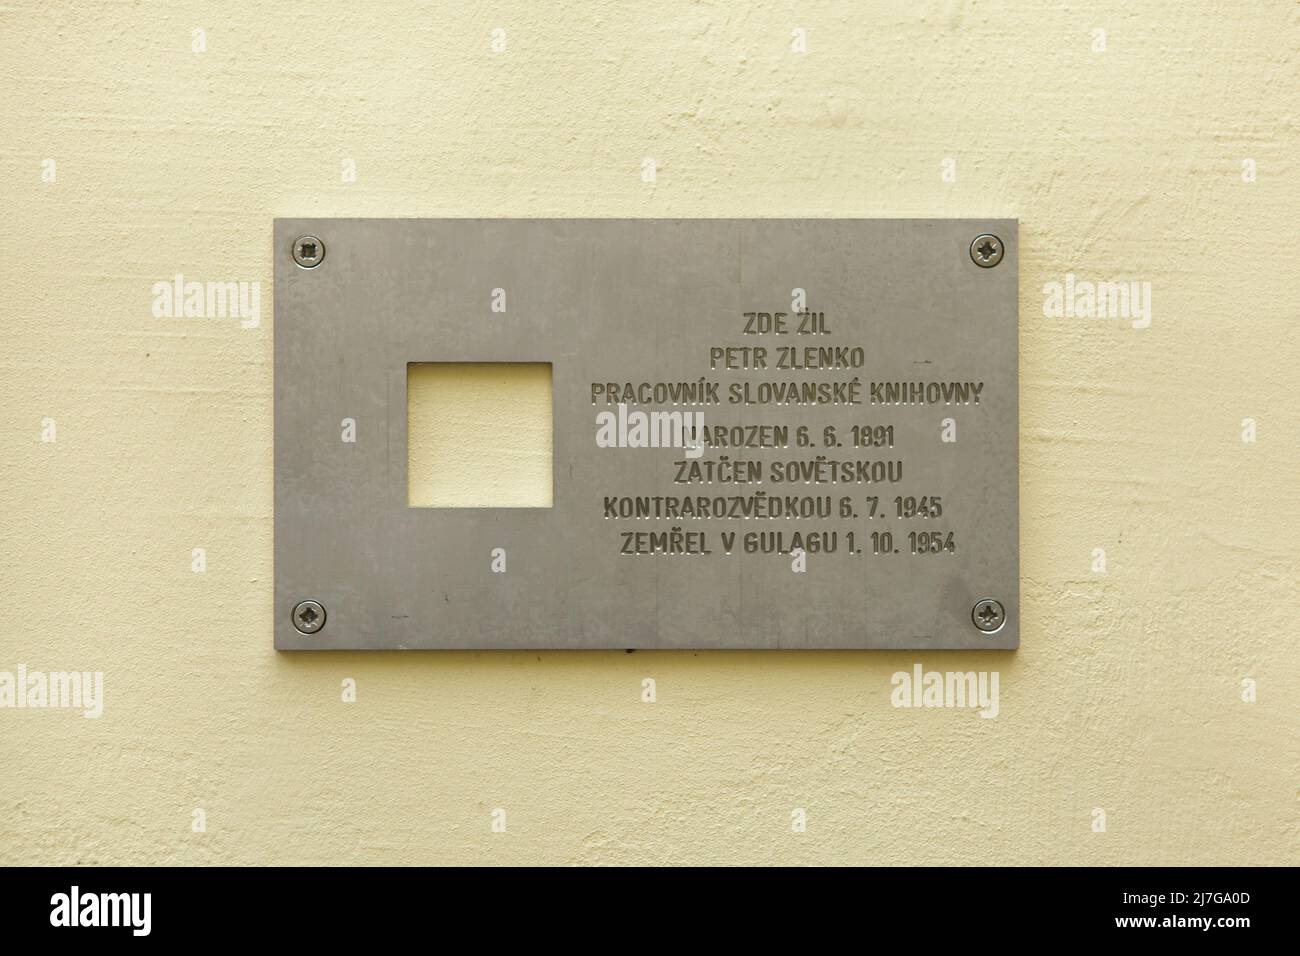 Commemorative plaque devoted to Ukrainian emigrant Petr Zlenko (1891-1954) on the house where he lived until his arrest in Vinohrady district in Prague, Czech Republic. Petr Zlenko was arrested in this house by the SMERSH (Soviet military counterintelligence service) on 6 July 1945 and died in the Gulag on 1 October1954. Text in Czech means: Petr Zlenko, an employee of the Slavonic Library (Slovanská knihovna), lived here. Born on 6 June 1891. Arrested by the Soviet counterintelligence service on 6 July 1945. Died in the on 1 October 1954. The plaque is a part of the civic initiative 'Last Add Stock Photo